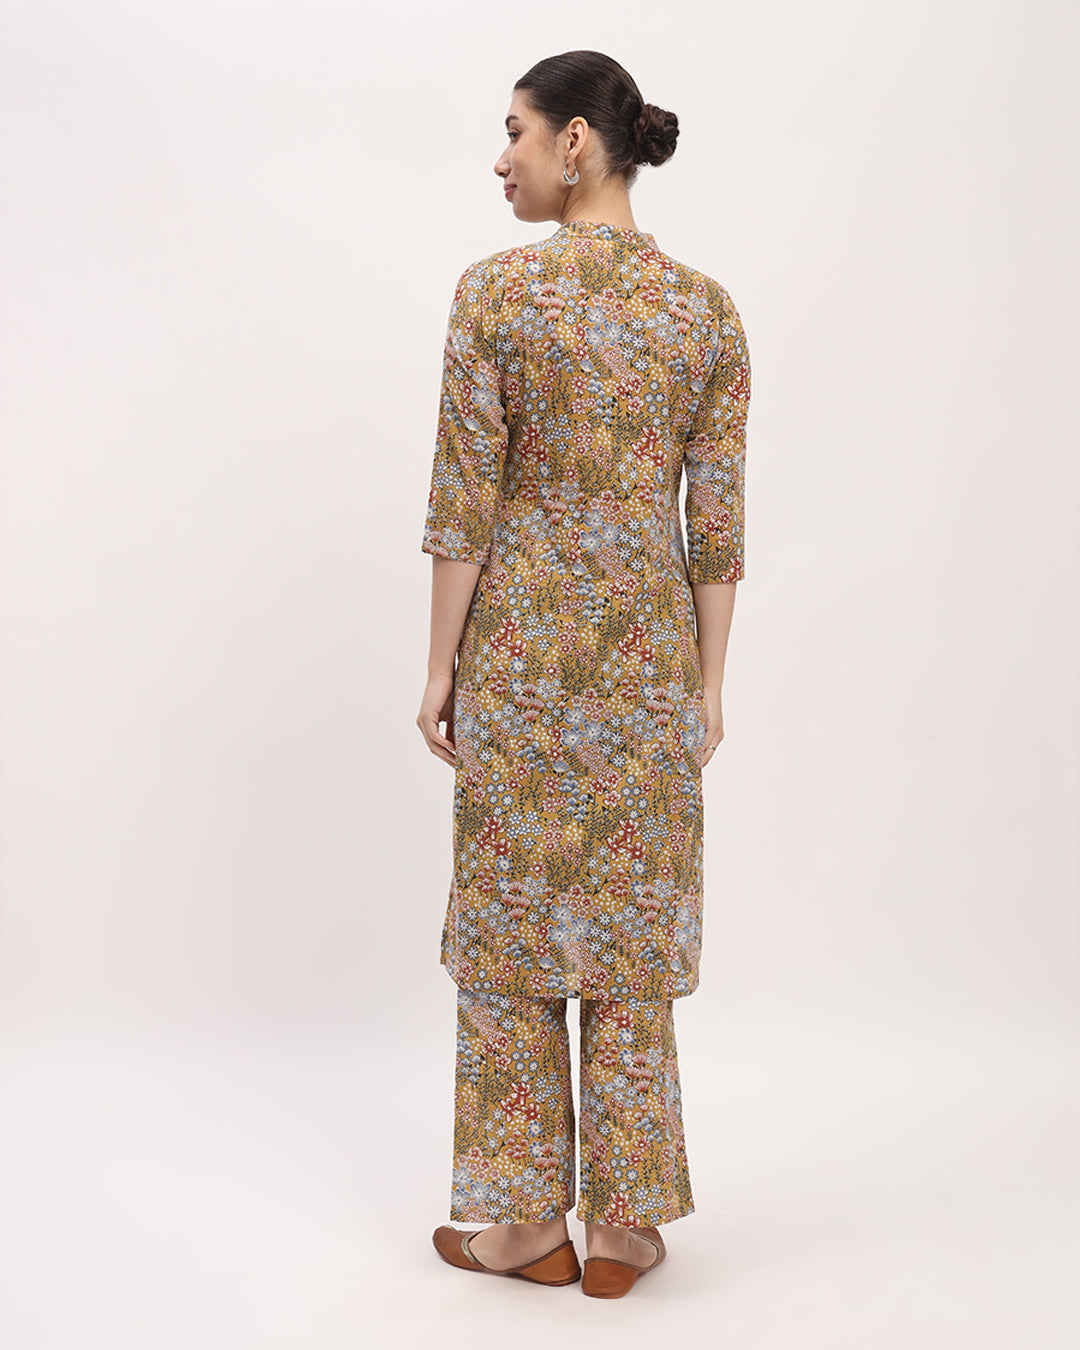 Combo: Golden Blossom & Ivory Quadrangle High-Low Printed Kurta (Without Bottoms)